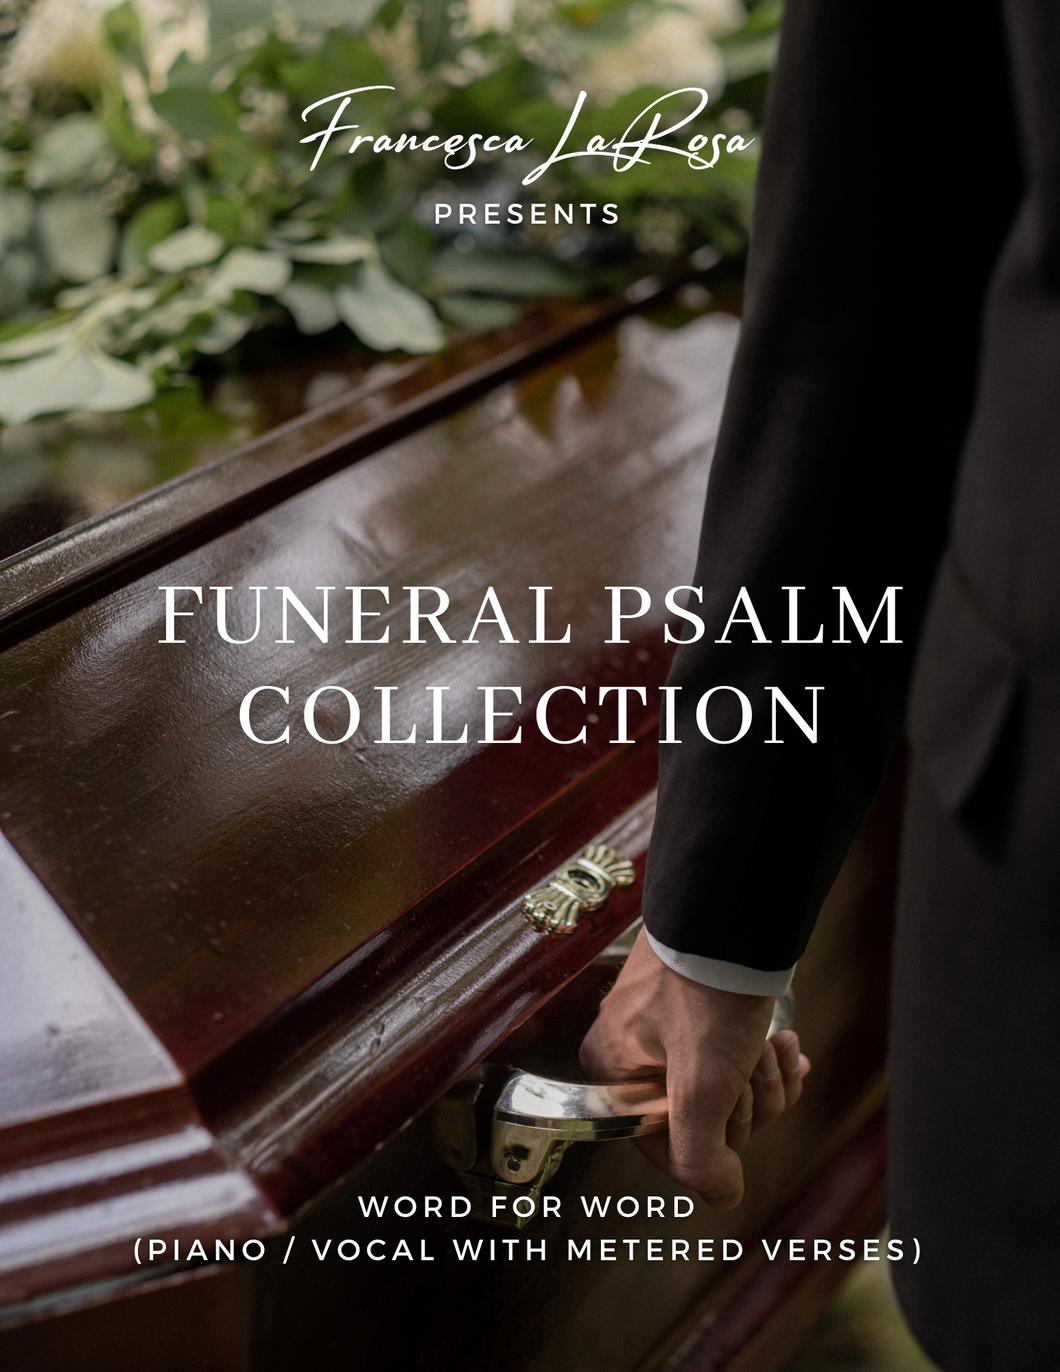 The Complete Funeral Psalm Collection (Piano / Vocal Metered Verses)